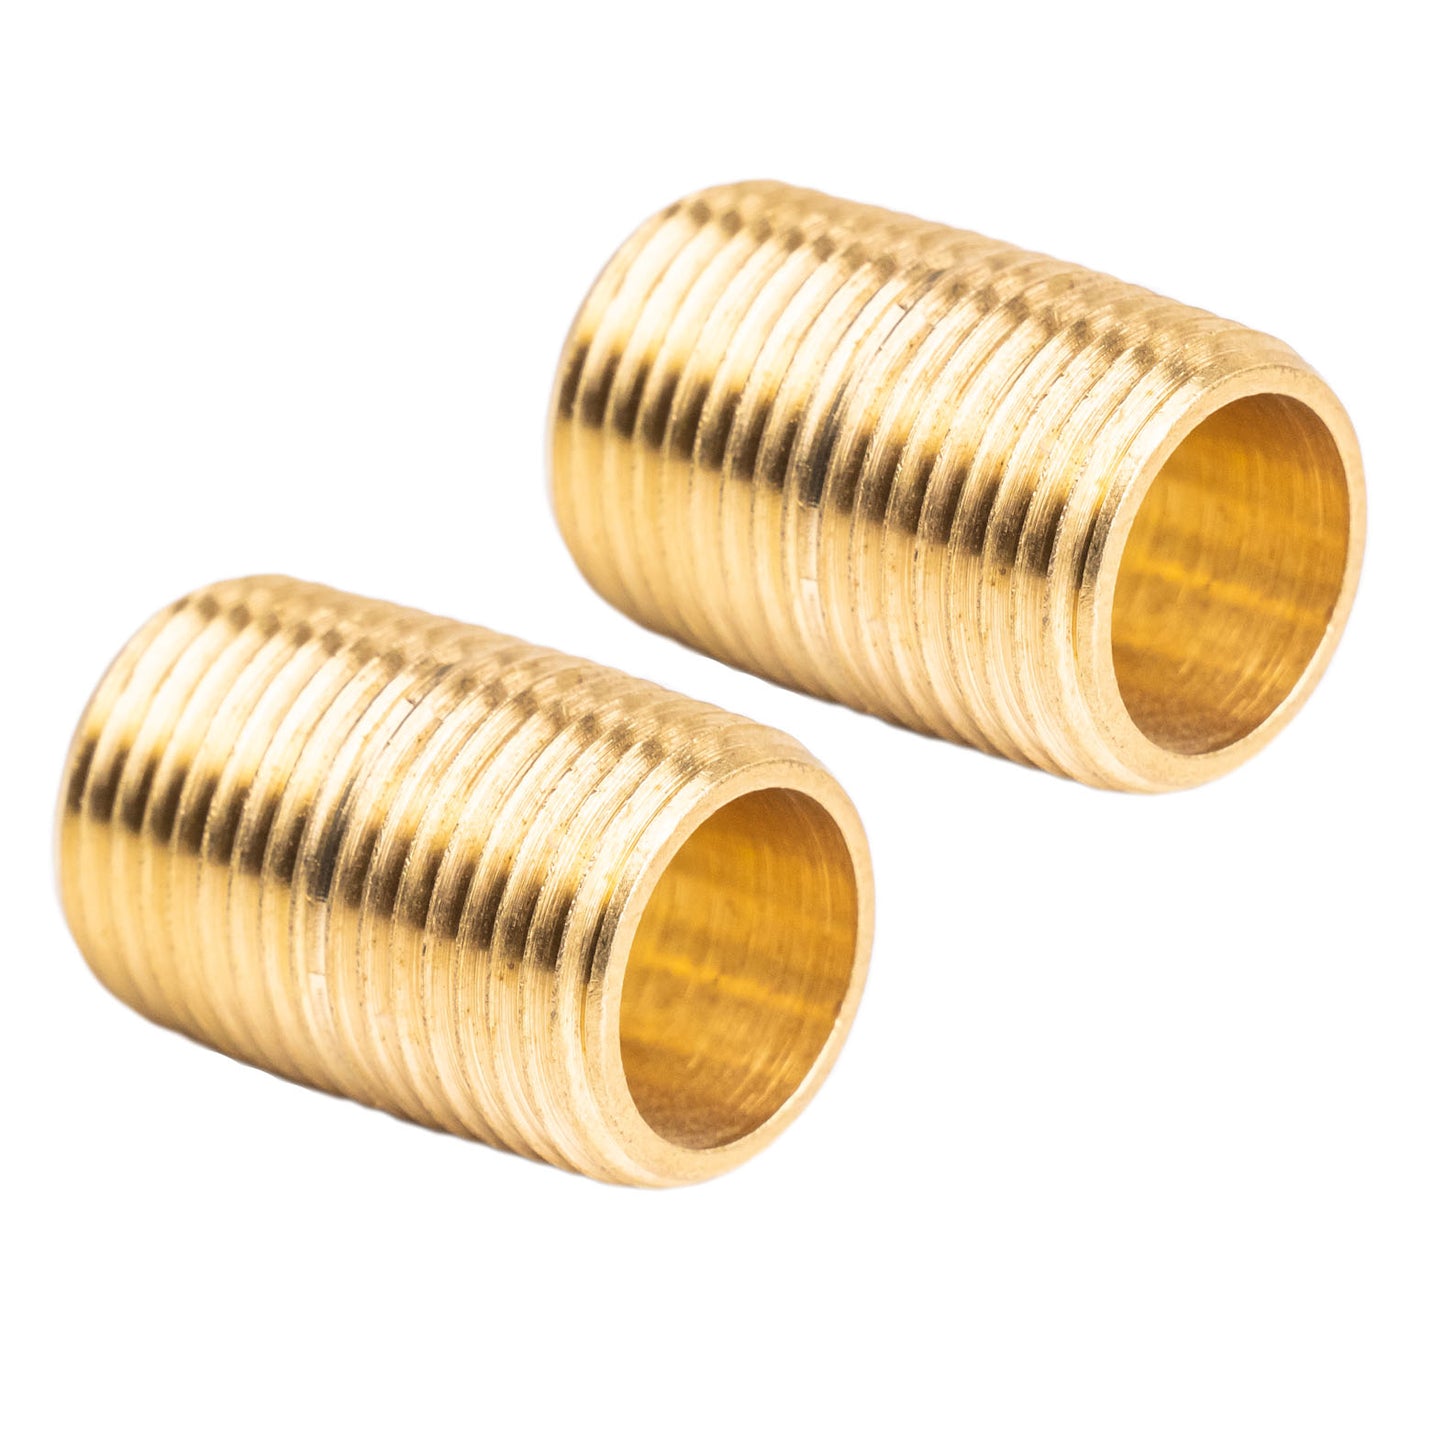 3/8" NPT X Male Close Pipe Nipples Threaded Brass Fitting Pipe Connector 2 Pack